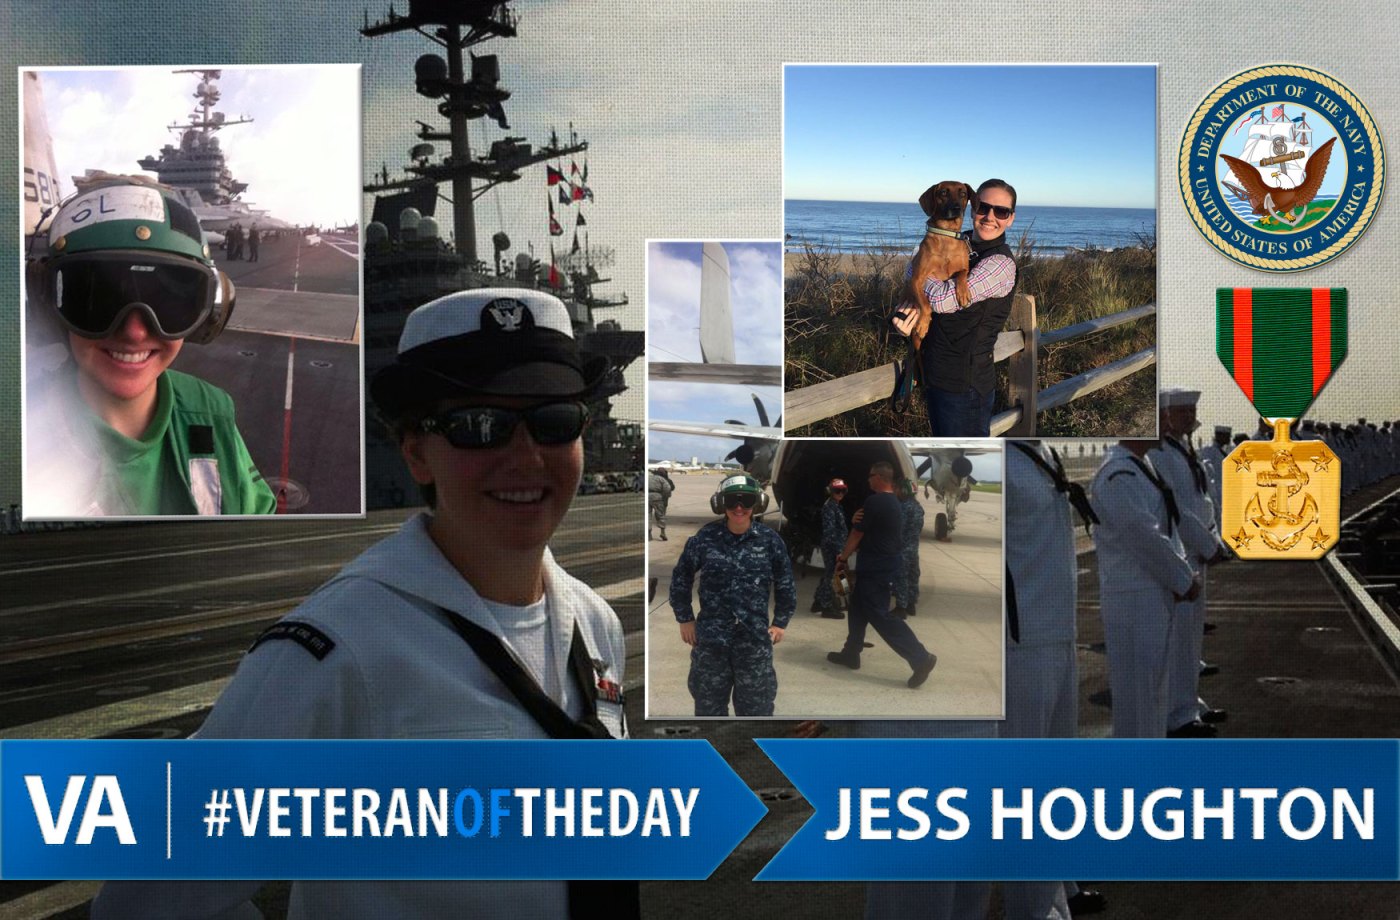 Veteran of the day jess houghton